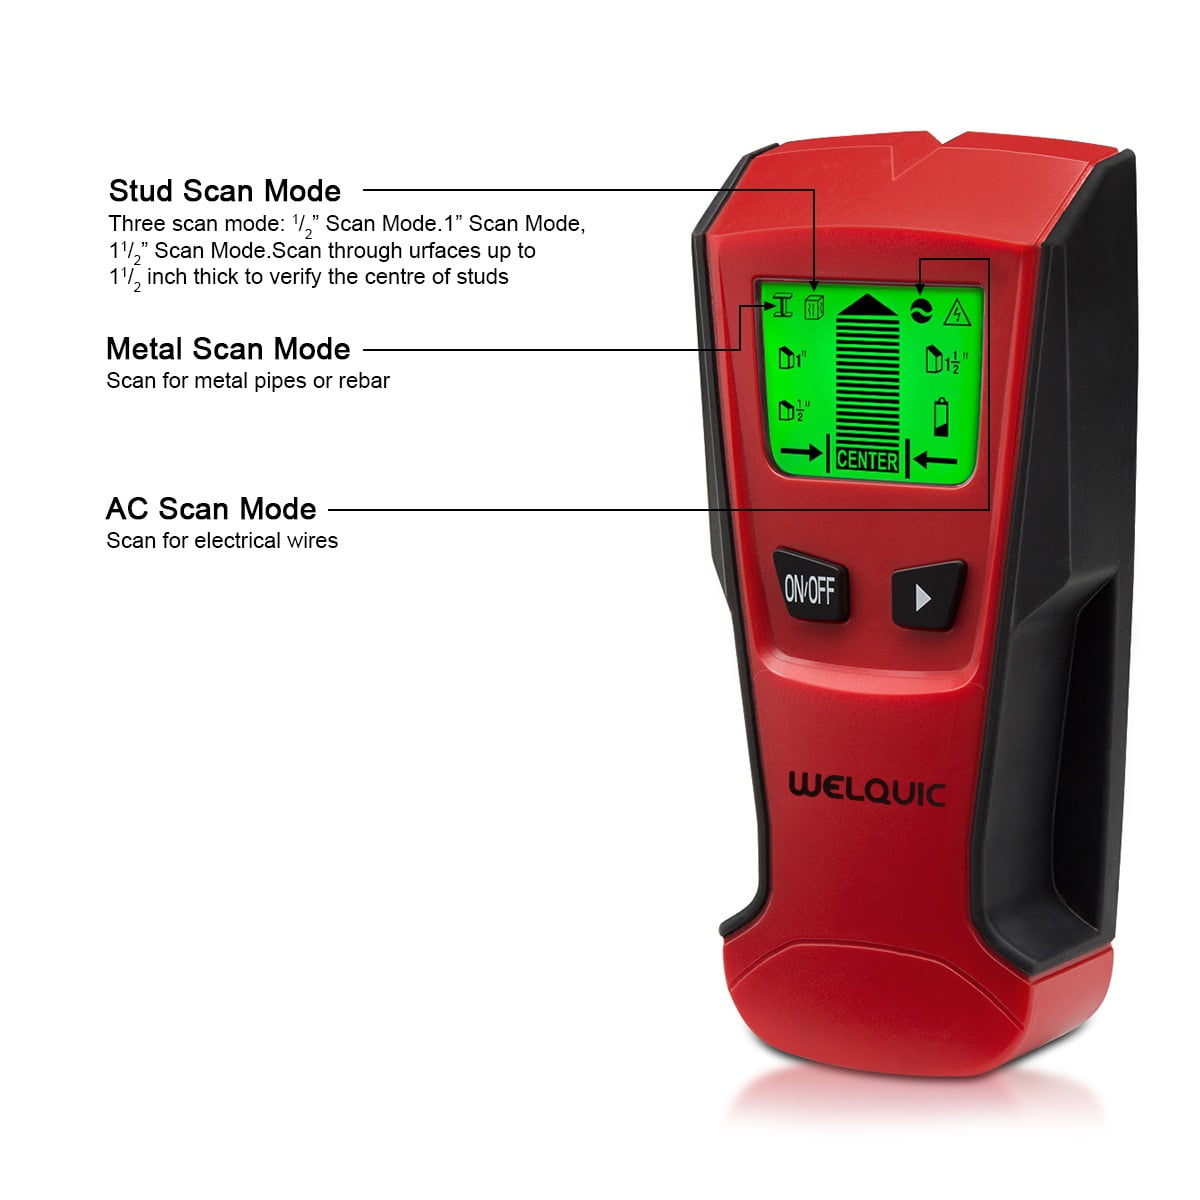 IT 3-in-1 Level with AC Detector